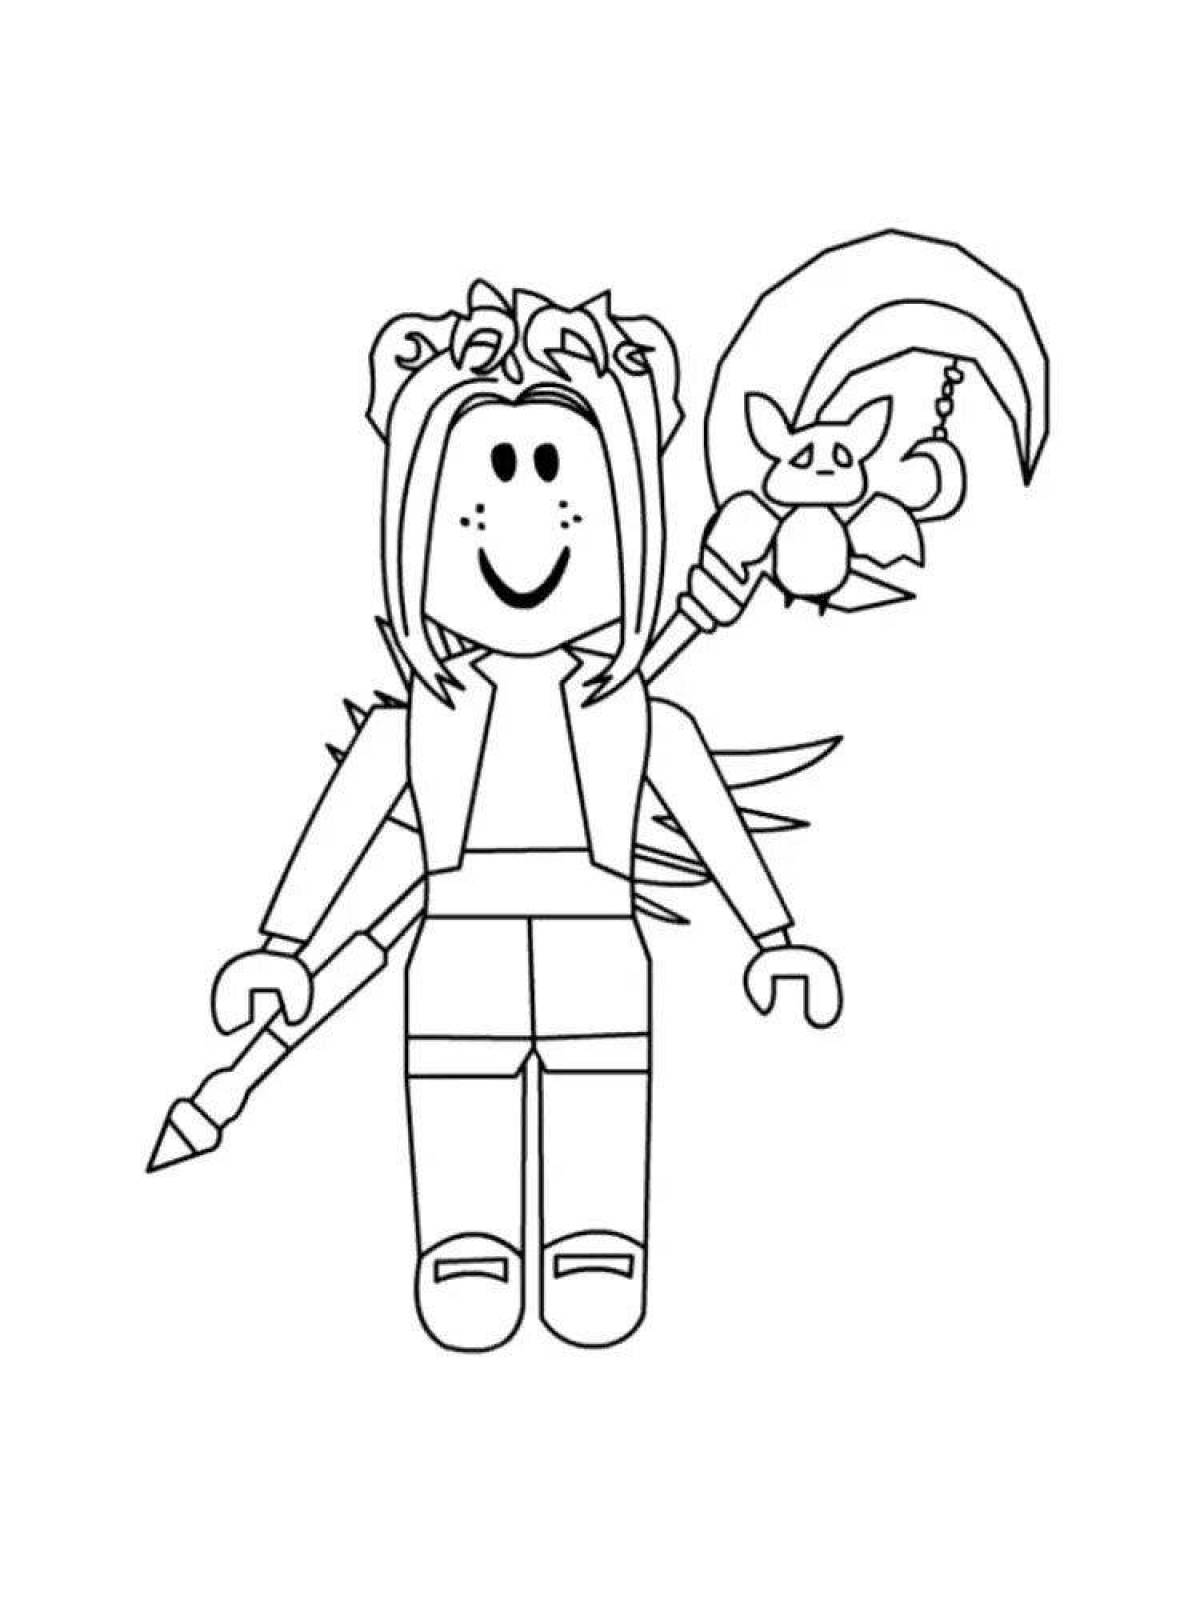 Roblox shining avatar coloring page